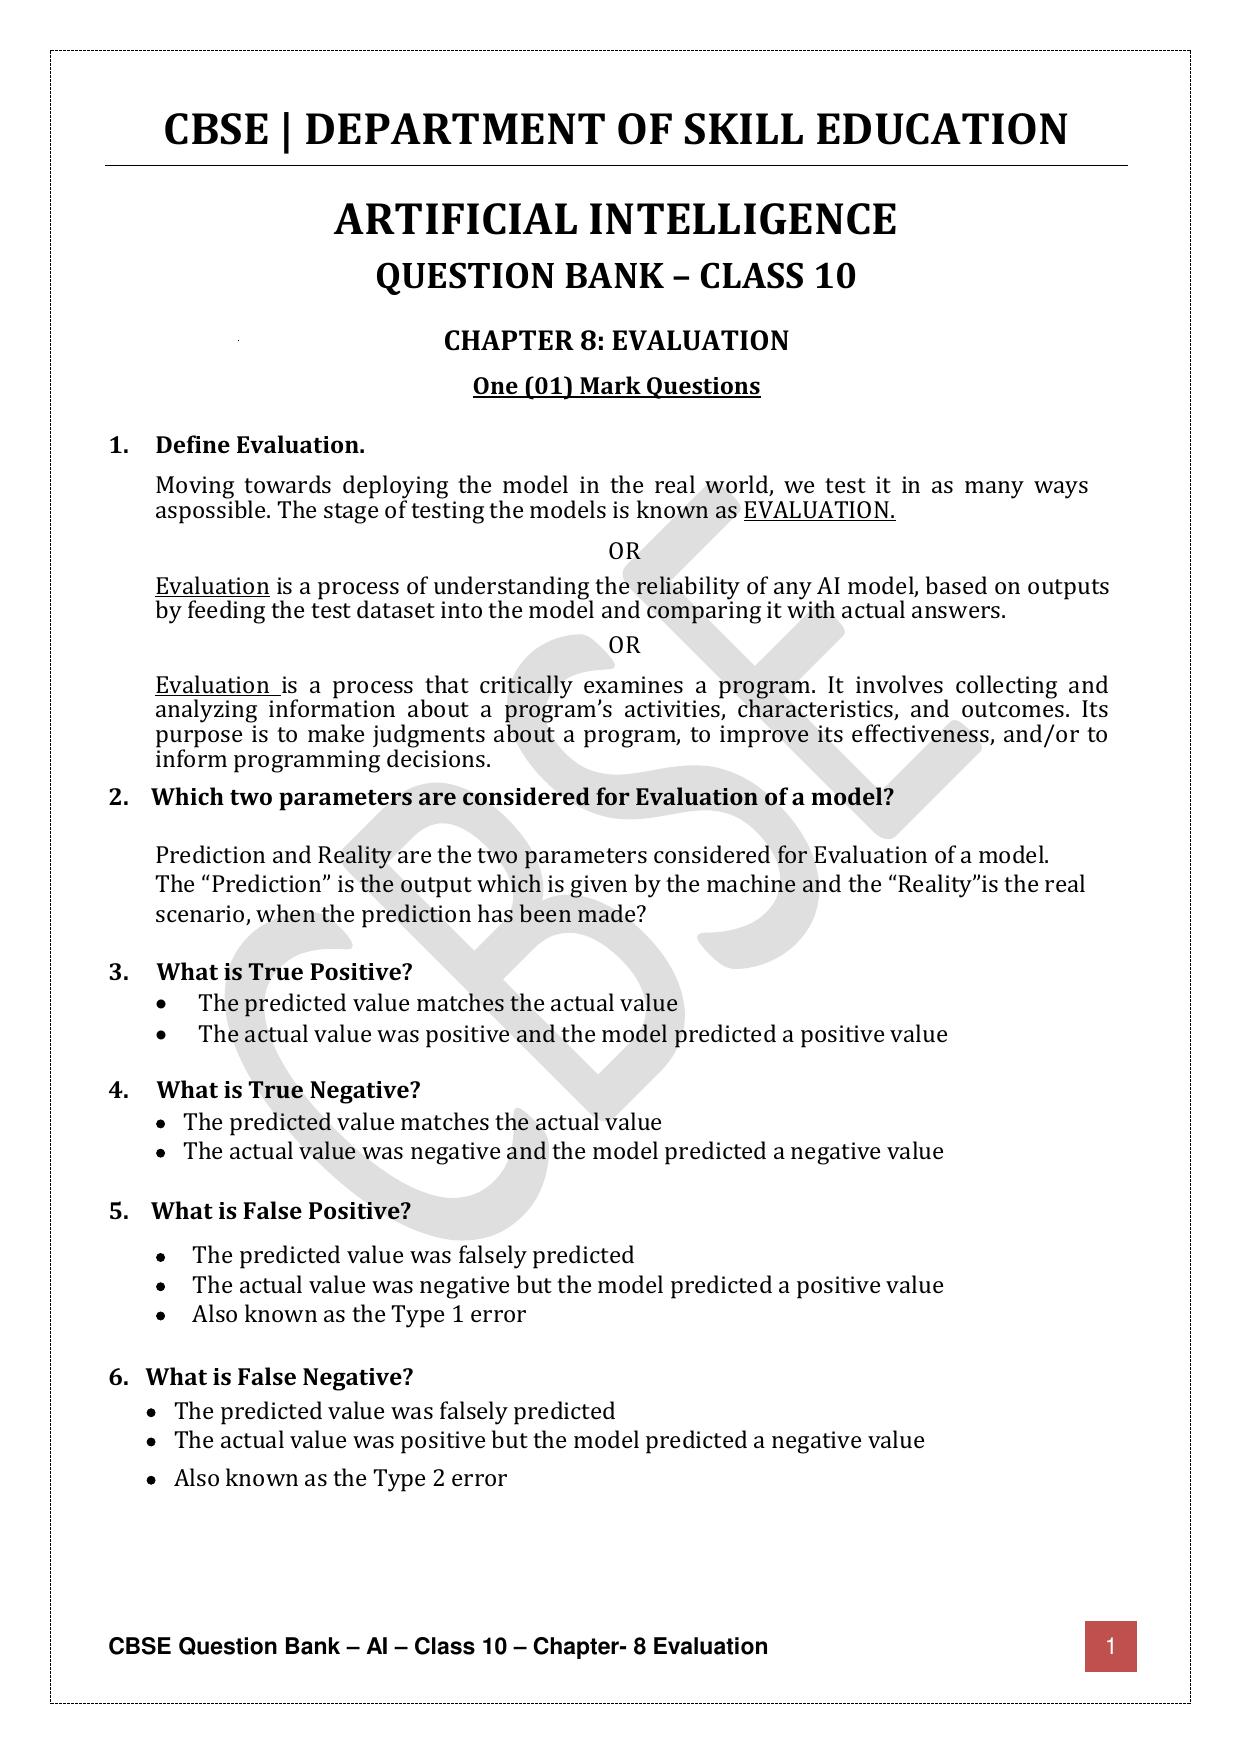 CBSE Class 10 Artificial Intelligence - Chapter 8 Question Bank - Page 1